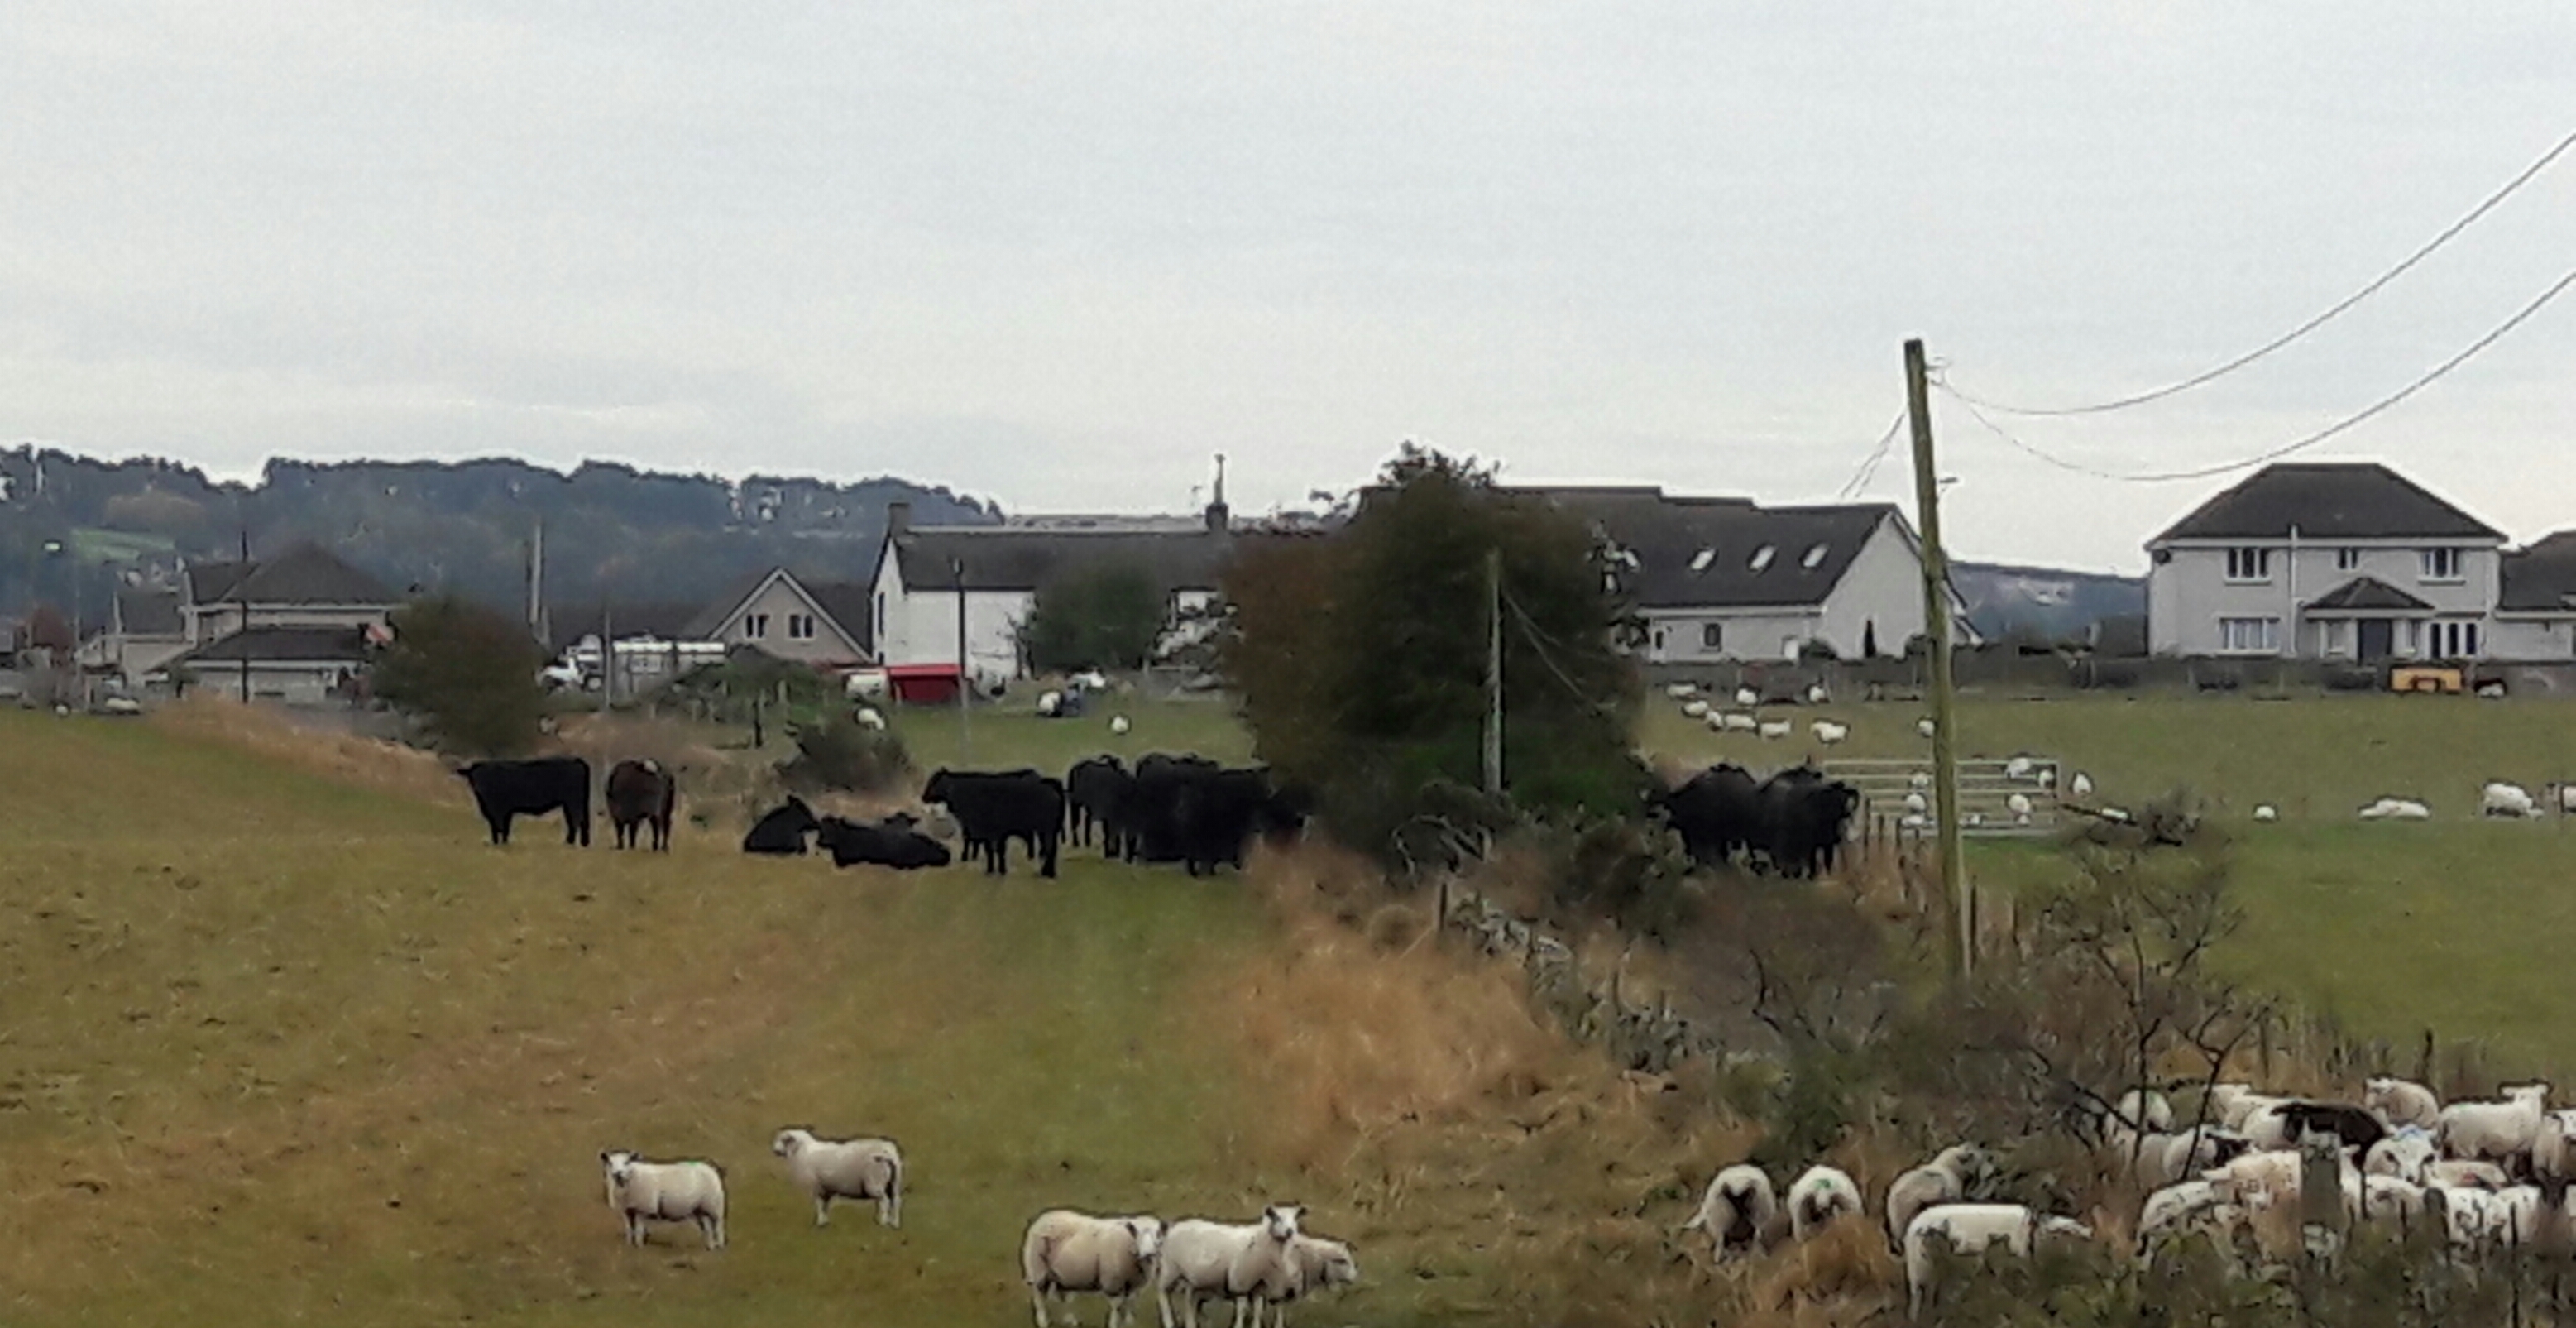 Some of the escapees at Turfbeg Farm, Forfar